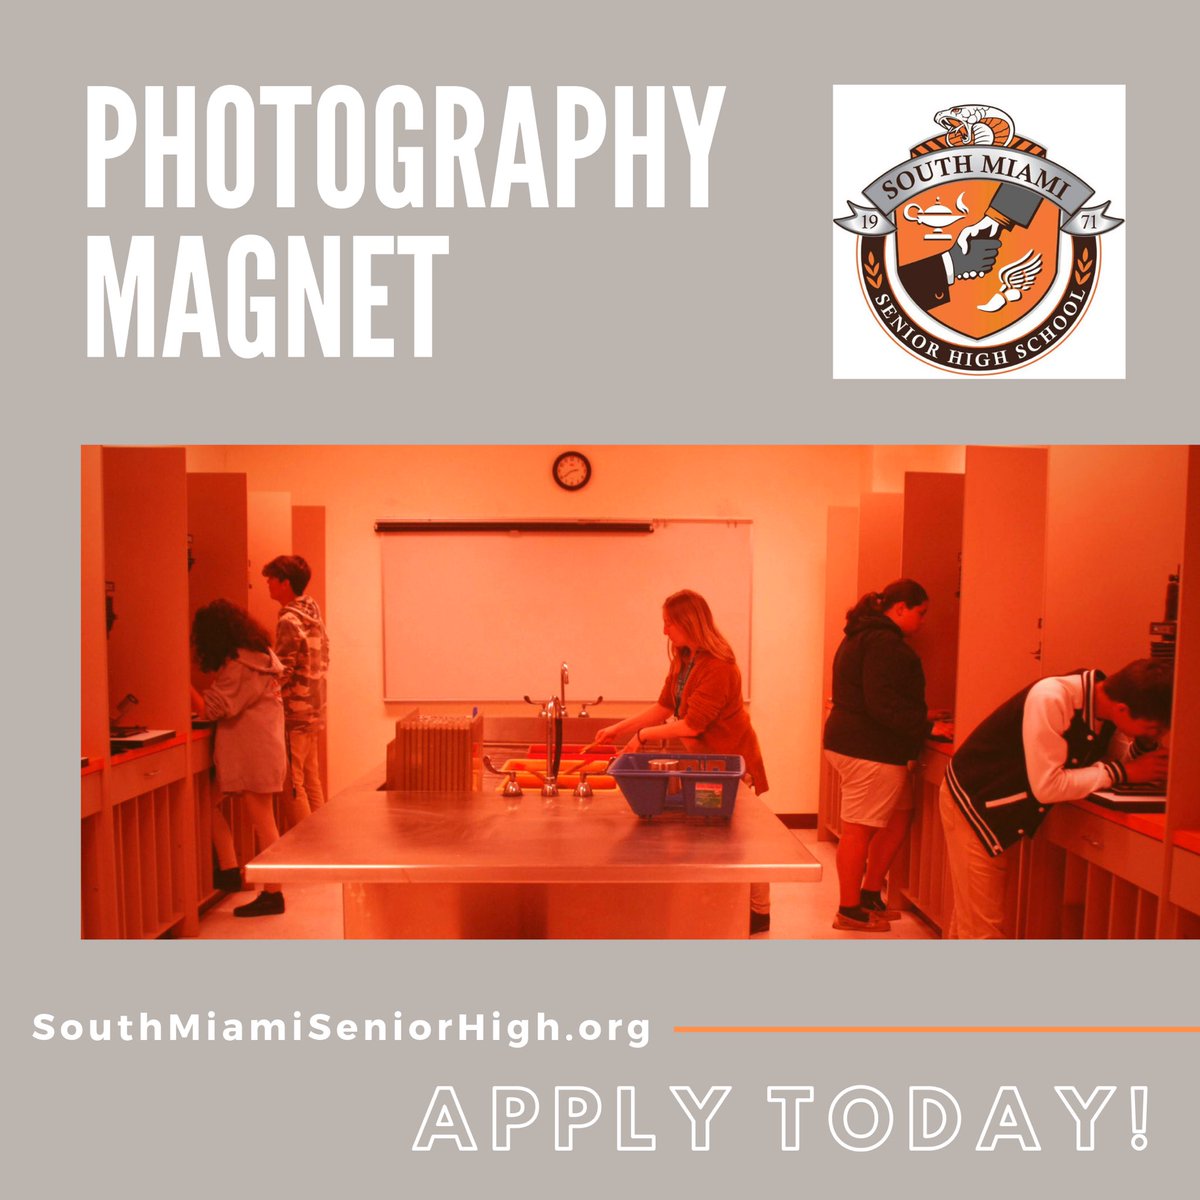 Now is your chance to join South Miami Senior High’s award-winning Magnet Photography Program. Visit yourchoicemiami.org between Oct.1 and Jan. 15 to apply!  #YourChoiceMiami #AcceleratingExcellence2020 @miamischools @miamimagnets